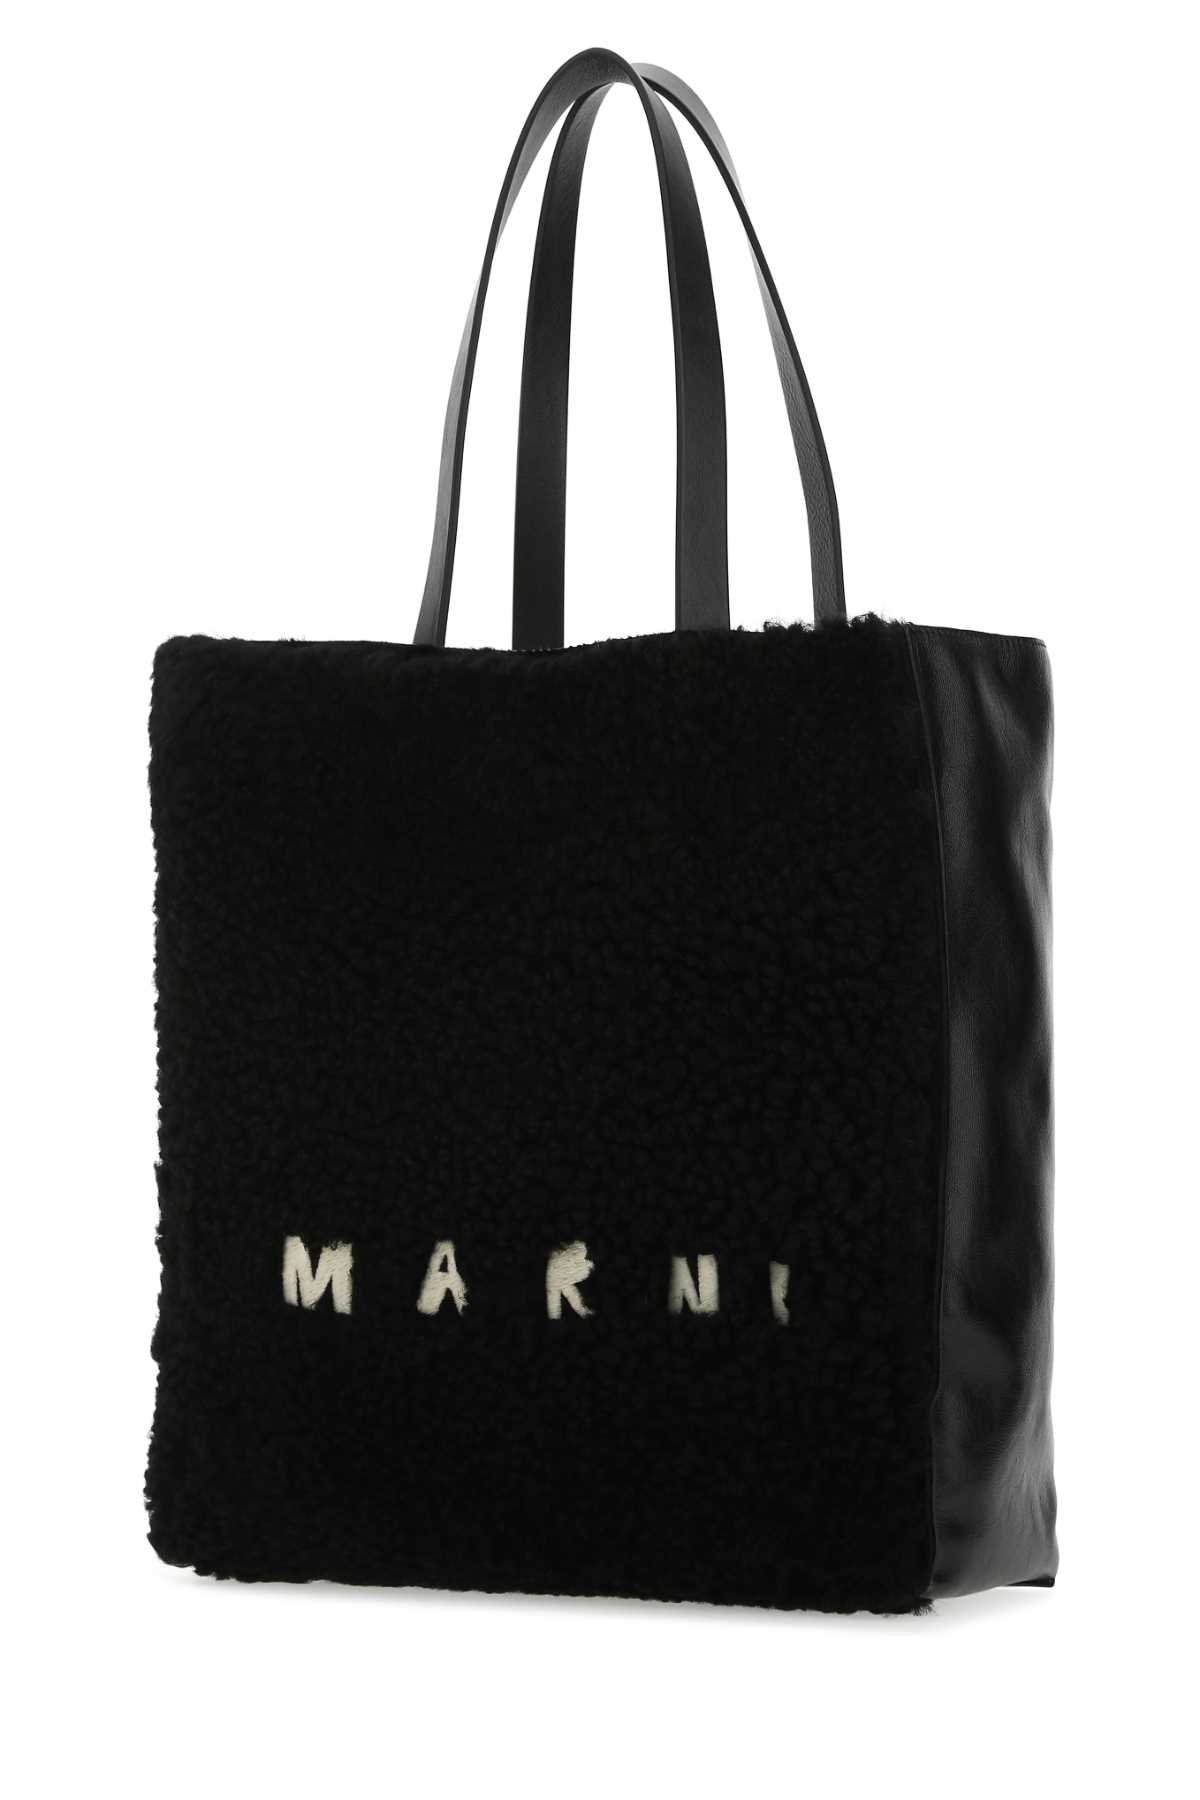 Marni Black Leather And Teddy Museo Shopping Bag